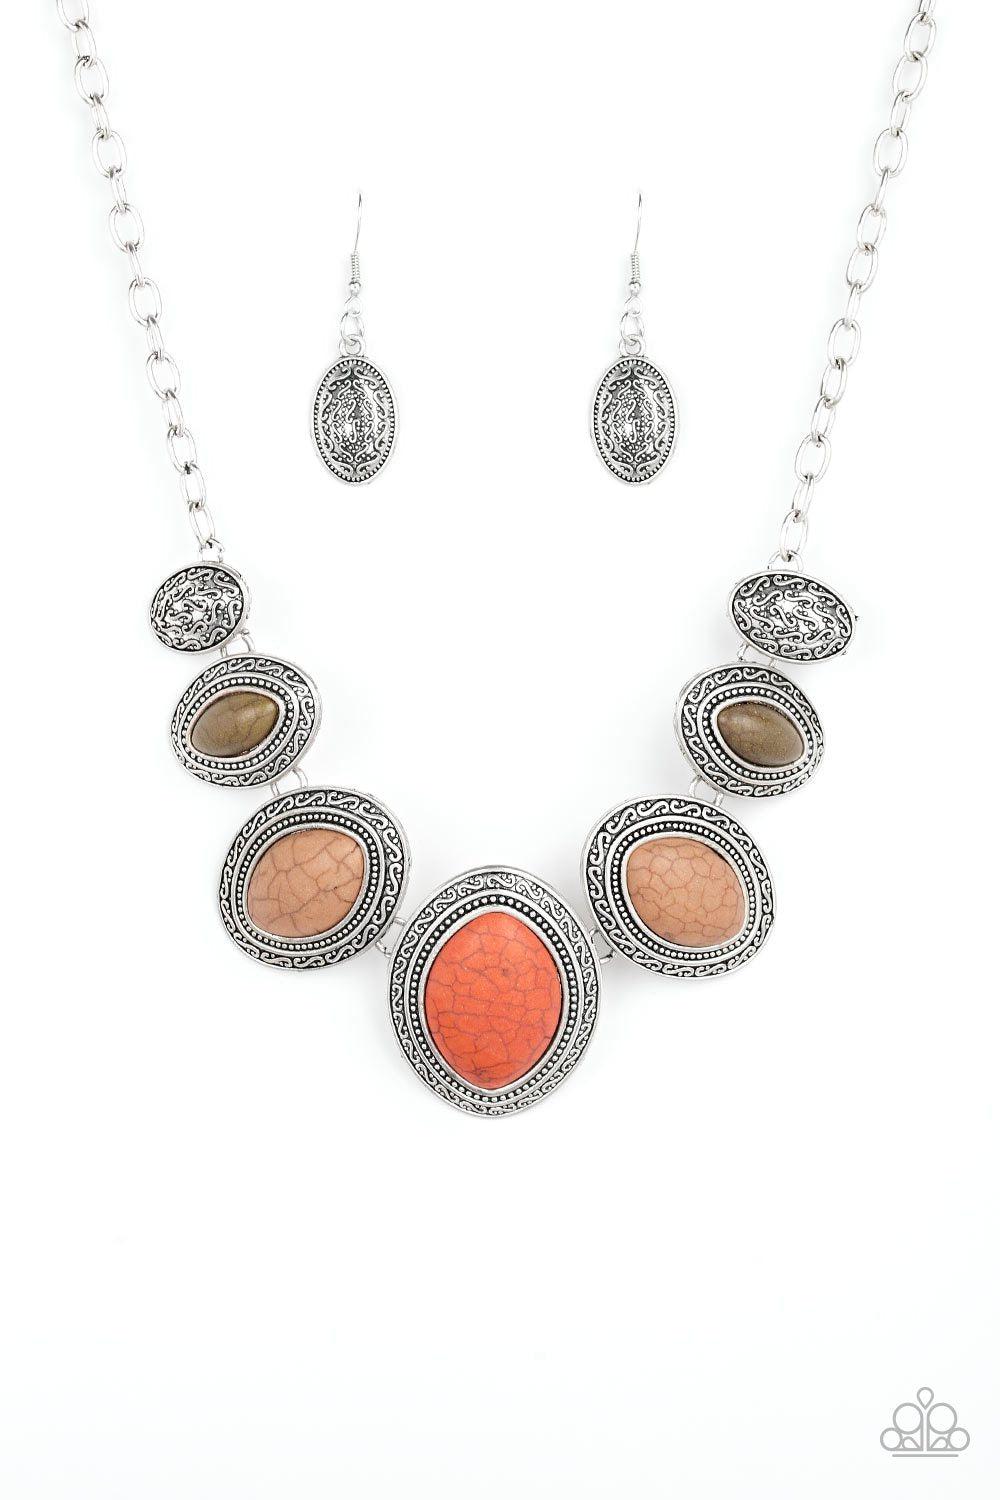 Sierra Serenity Burnt Orange Stone Necklace with matching Earrings - Paparazzi Accessories-CarasShop.com - $5 Jewelry by Cara Jewels